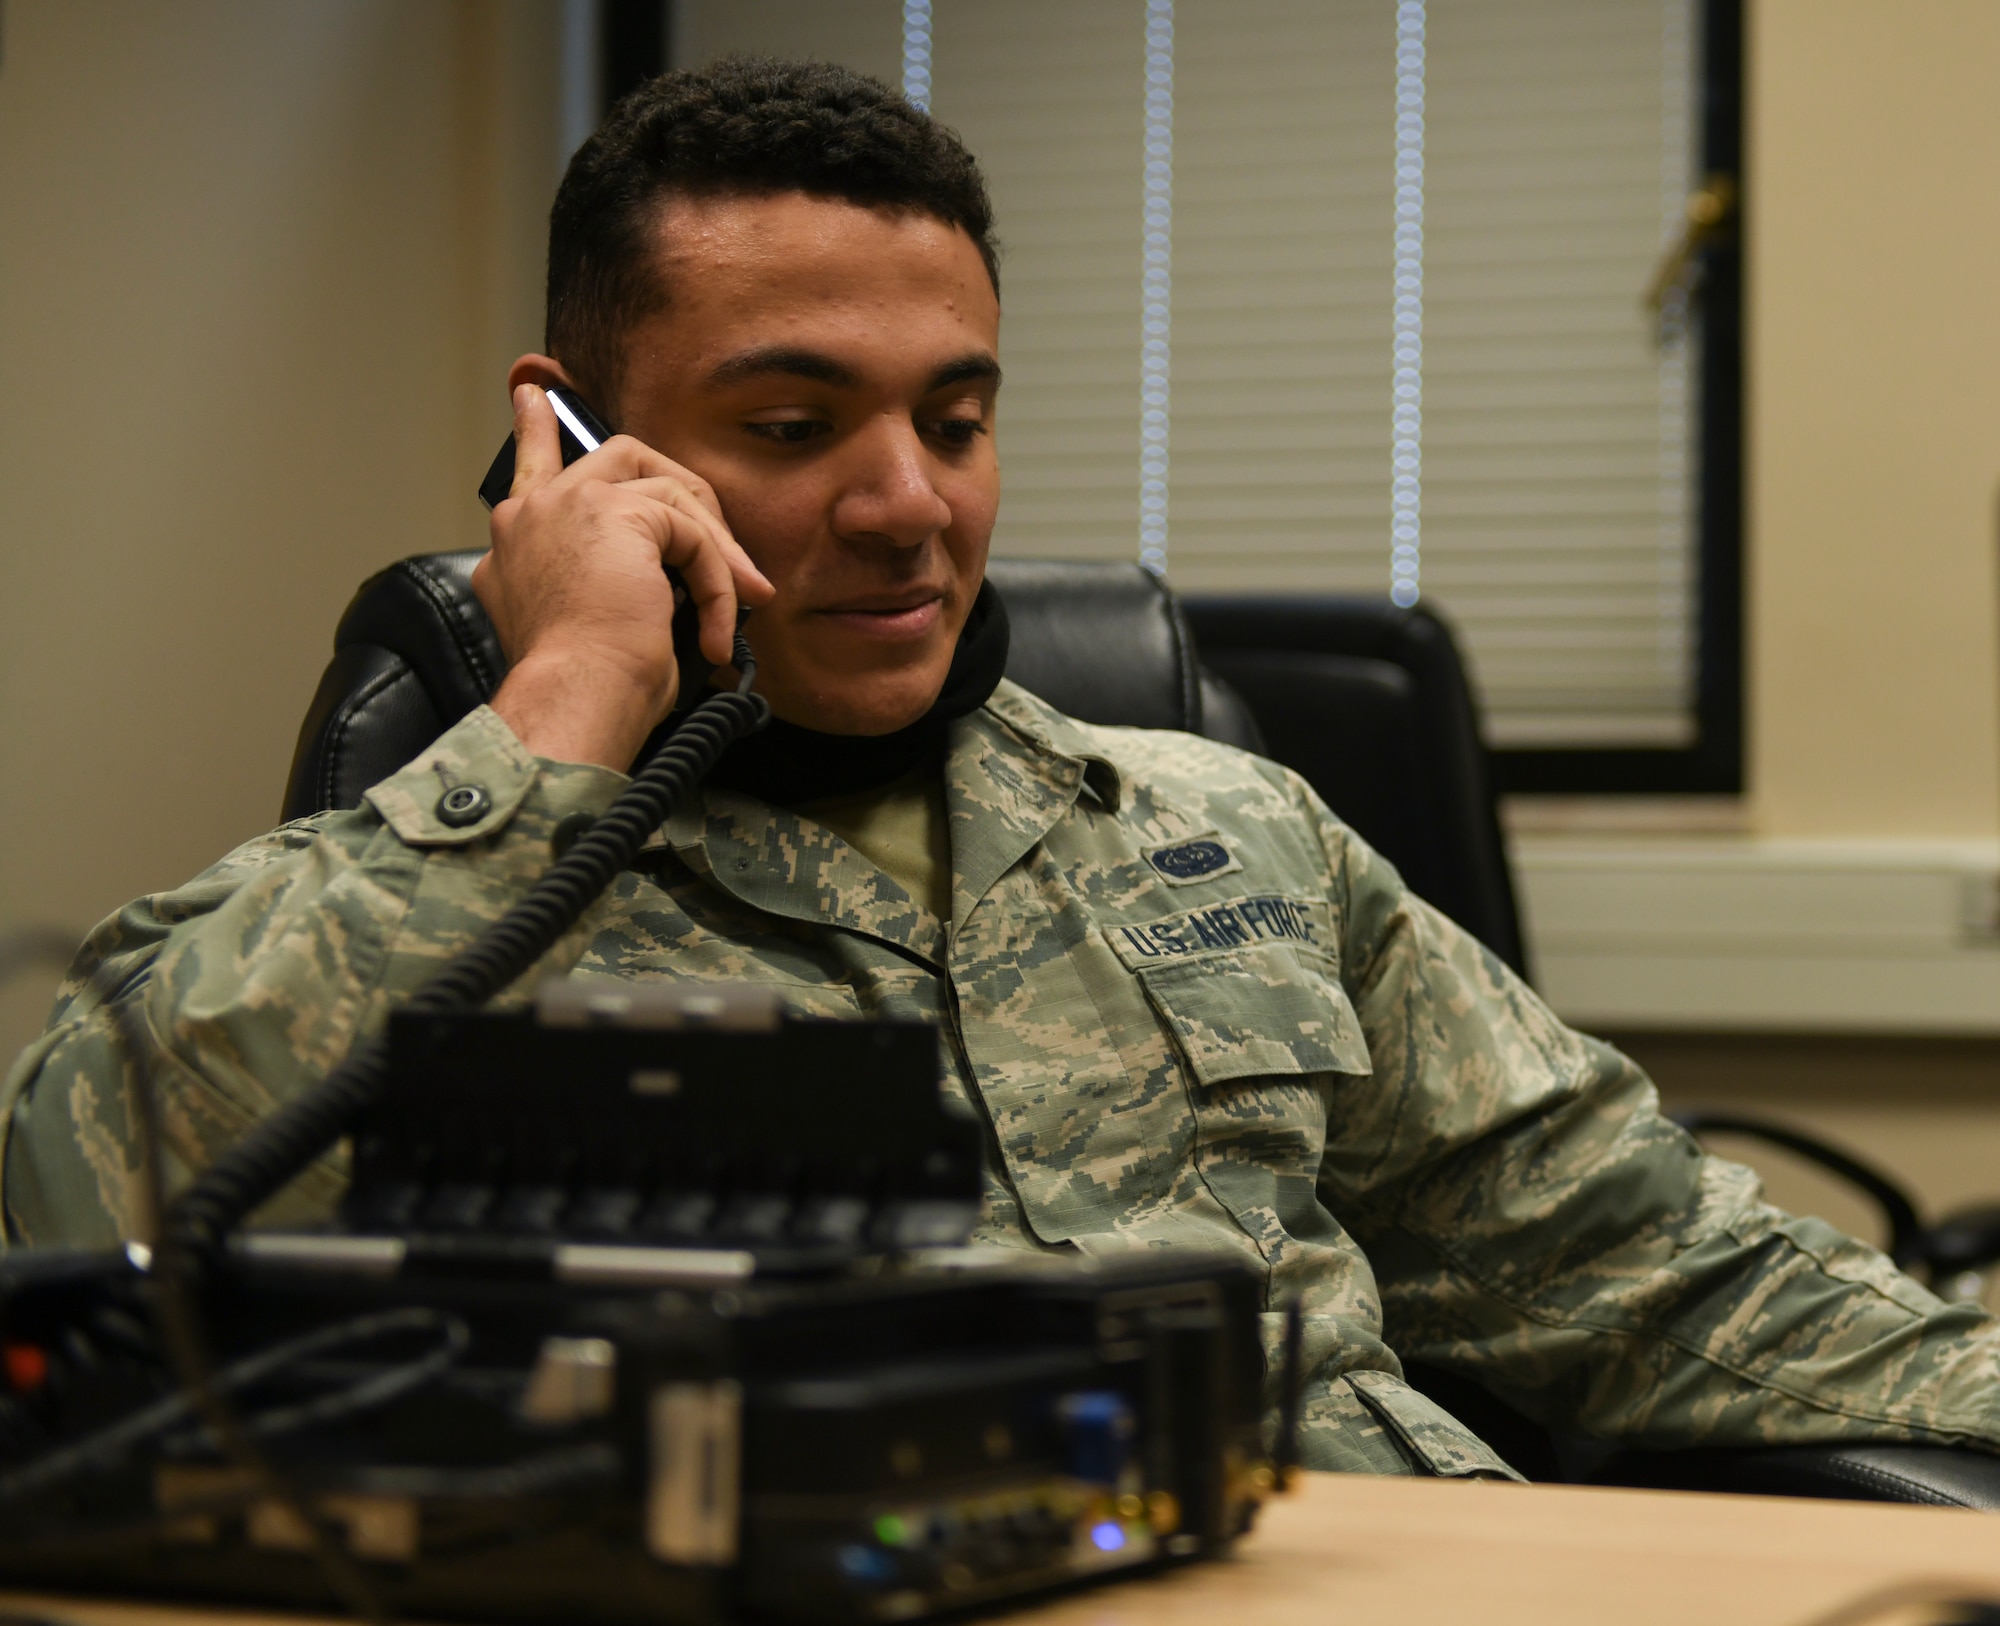 U.S. Air Force Senior Airman David Garcia, 100th Communications Squadron cyber transport technician, tests communication equipment during exercise Wolff Pack at Ramstein Air Base, Sept. 29, 2020. The exercise developed multi-capable Airmen who can accomplish duties outside of their typical responsibilities in support of the mission. (U.S. Air Force photo by Staff. Sgt. Anthony Hetlage)